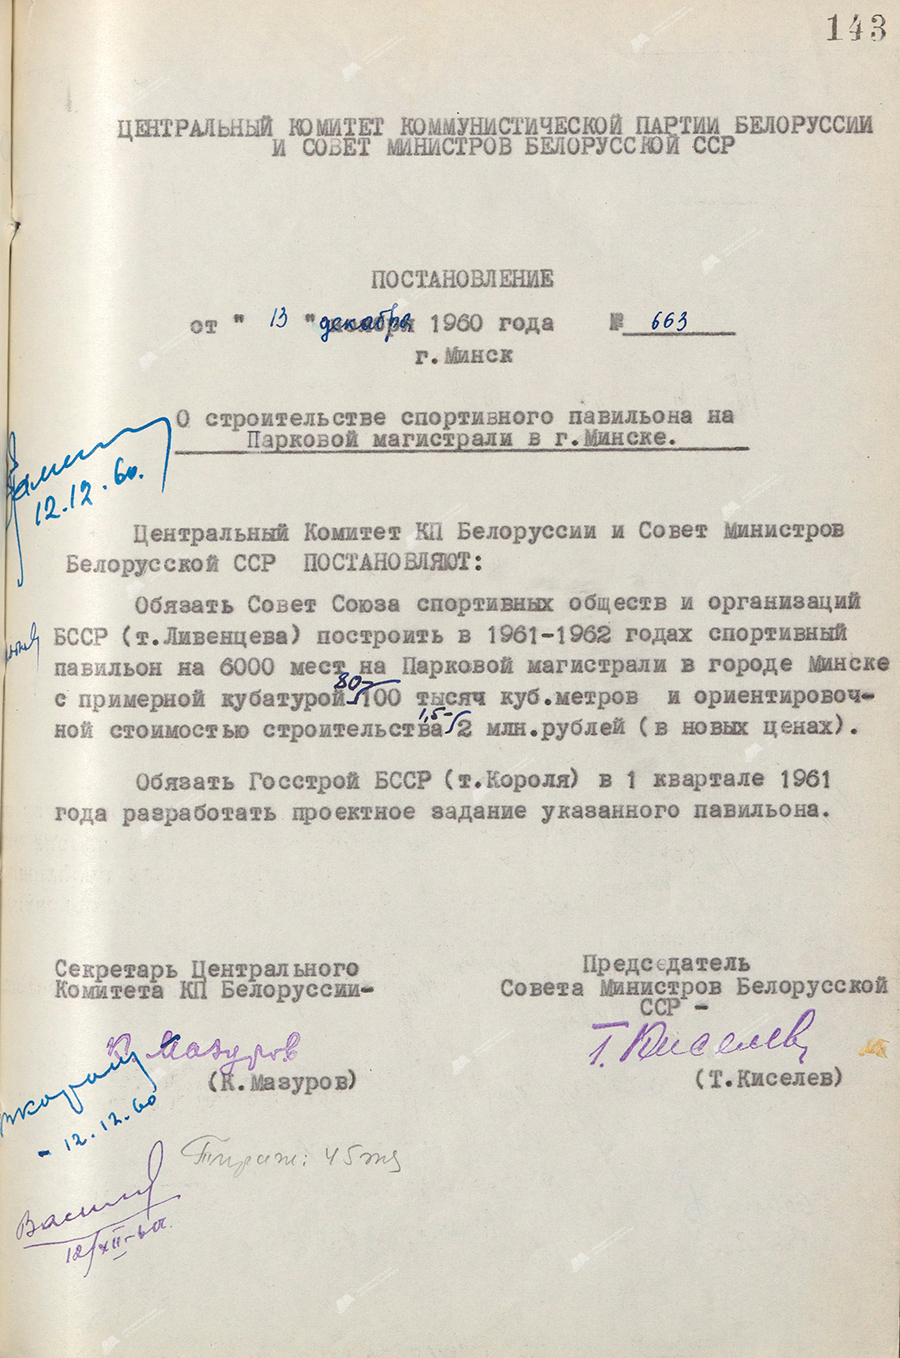 Resolution No. 663 of the Central Committee of the Communist Party of Belarus and the Council of Ministers of the BSSR «On the construction of a sports pavilion on the Park Highway in Minsk»-стр. 0